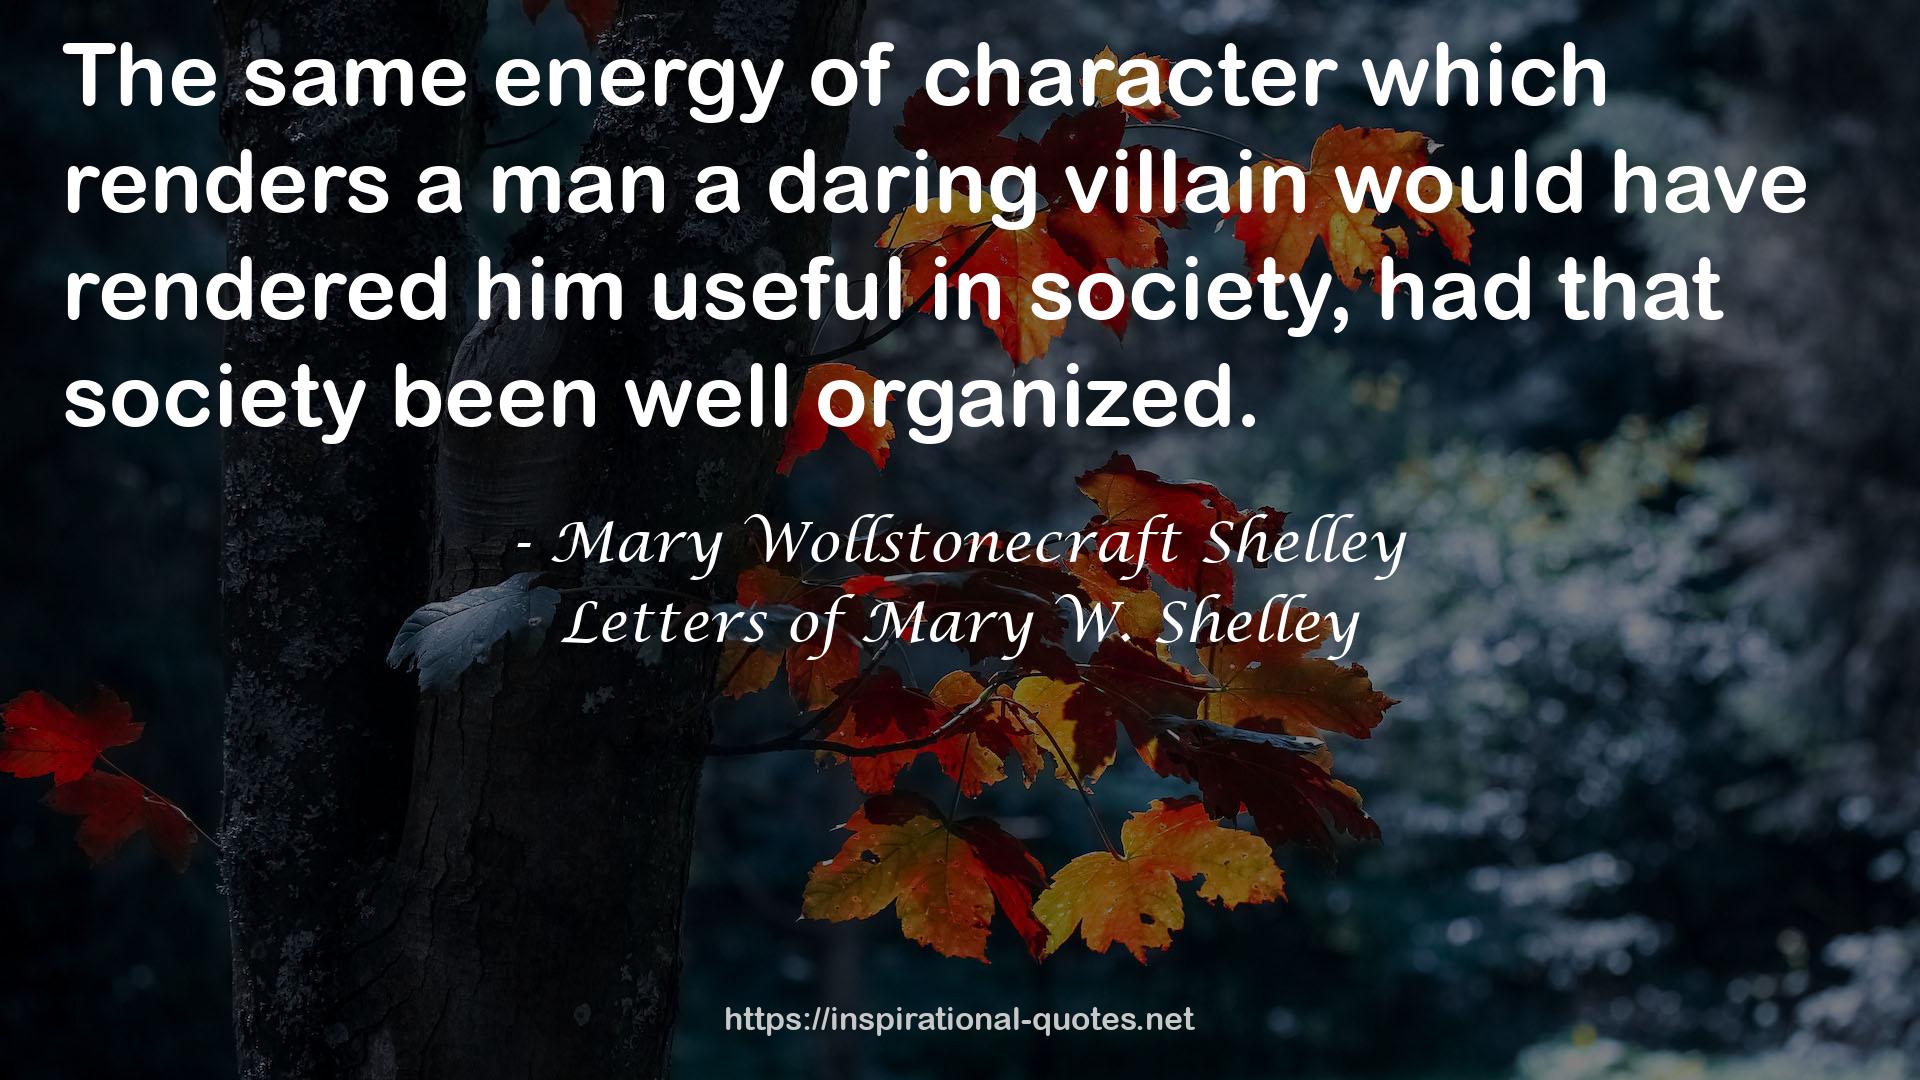 Letters of Mary W. Shelley QUOTES